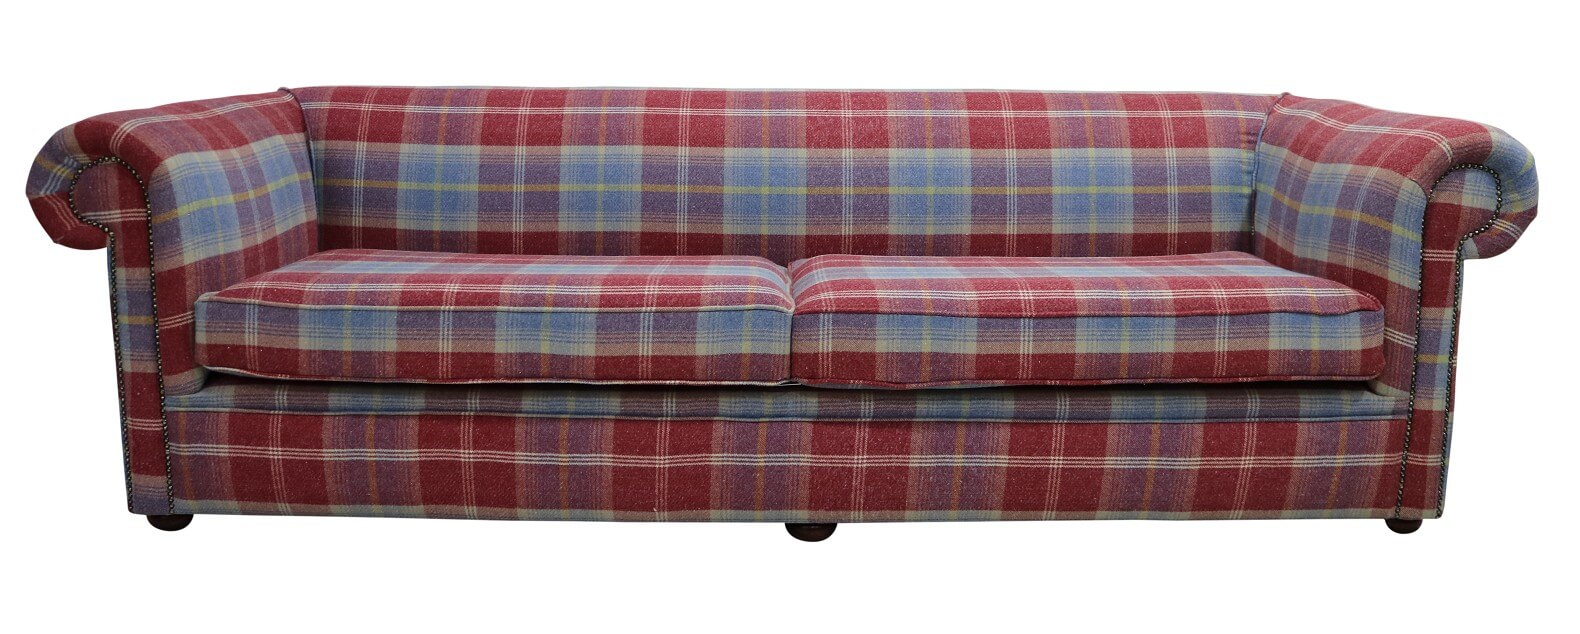 Product photograph of Chesterfield 1930 039 S 4 Seater Balmoral Ruby Red Check P Amp S Fabric Sofa In Classic Style from Chesterfield Sofas